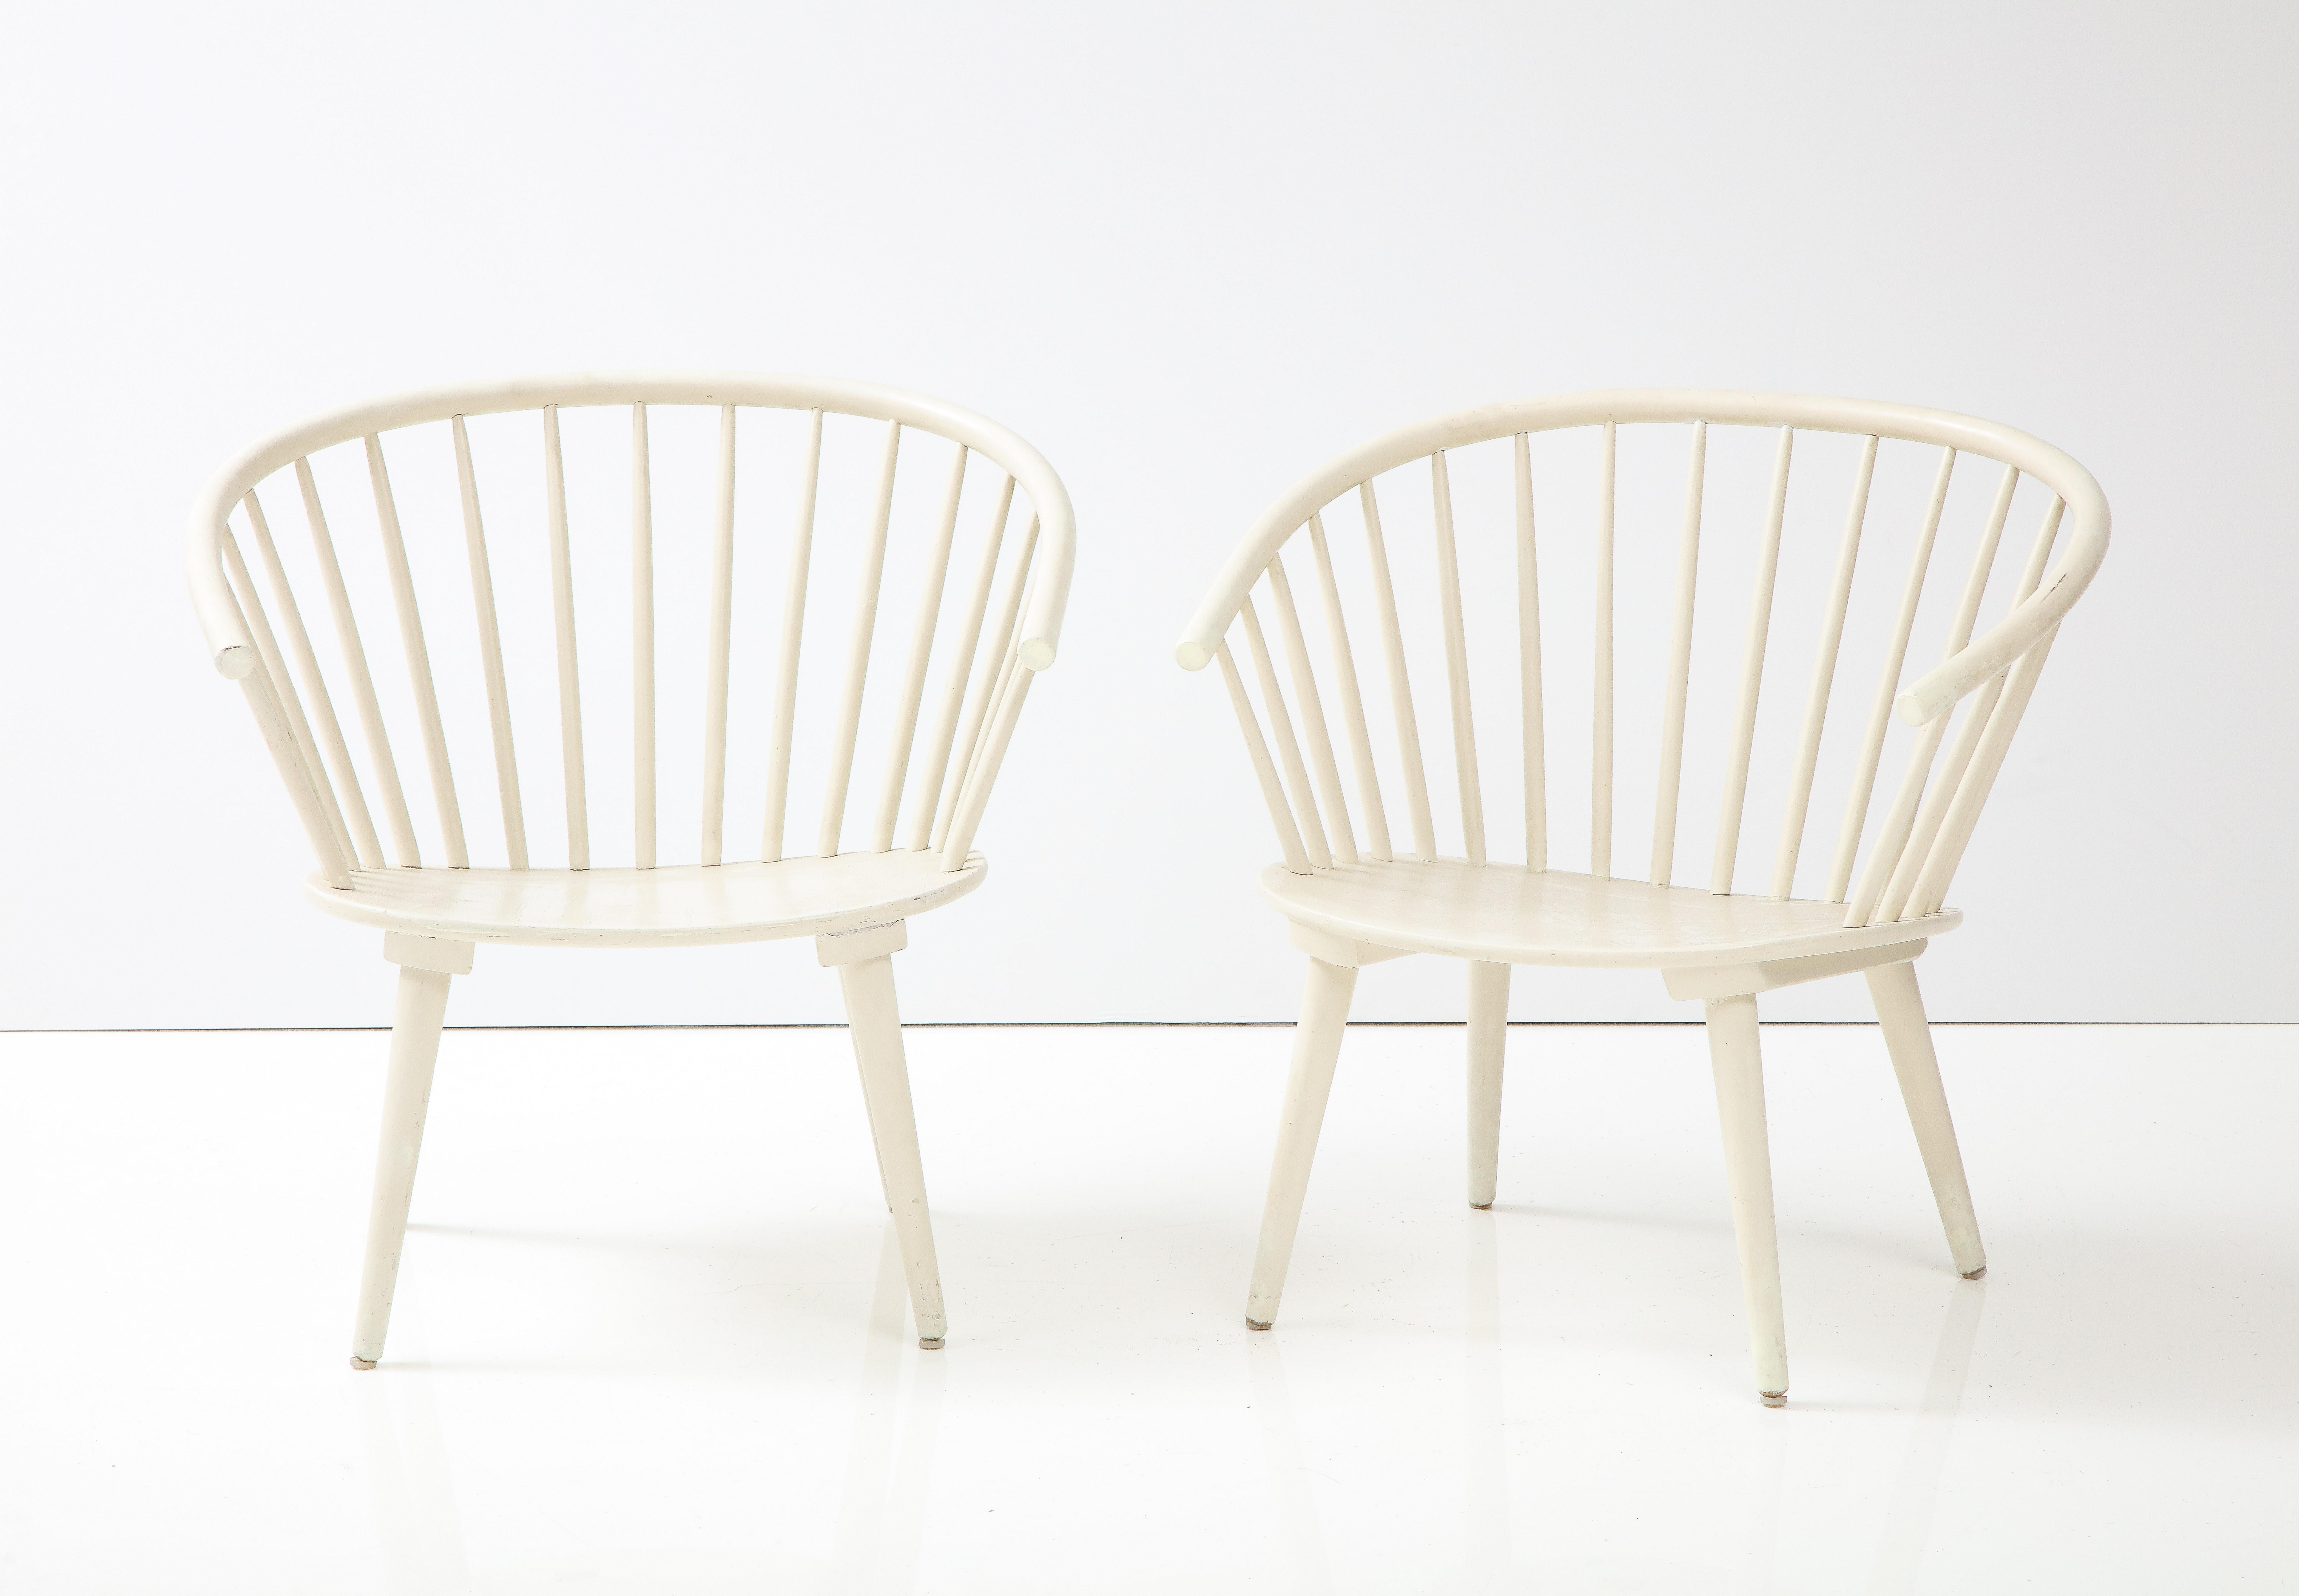 Pair of generous white Swedish horseshoe back armchairs, Sweden, c. 1964
Measures: H: 29.25, W: 29.5, D: 24.75 in.
 